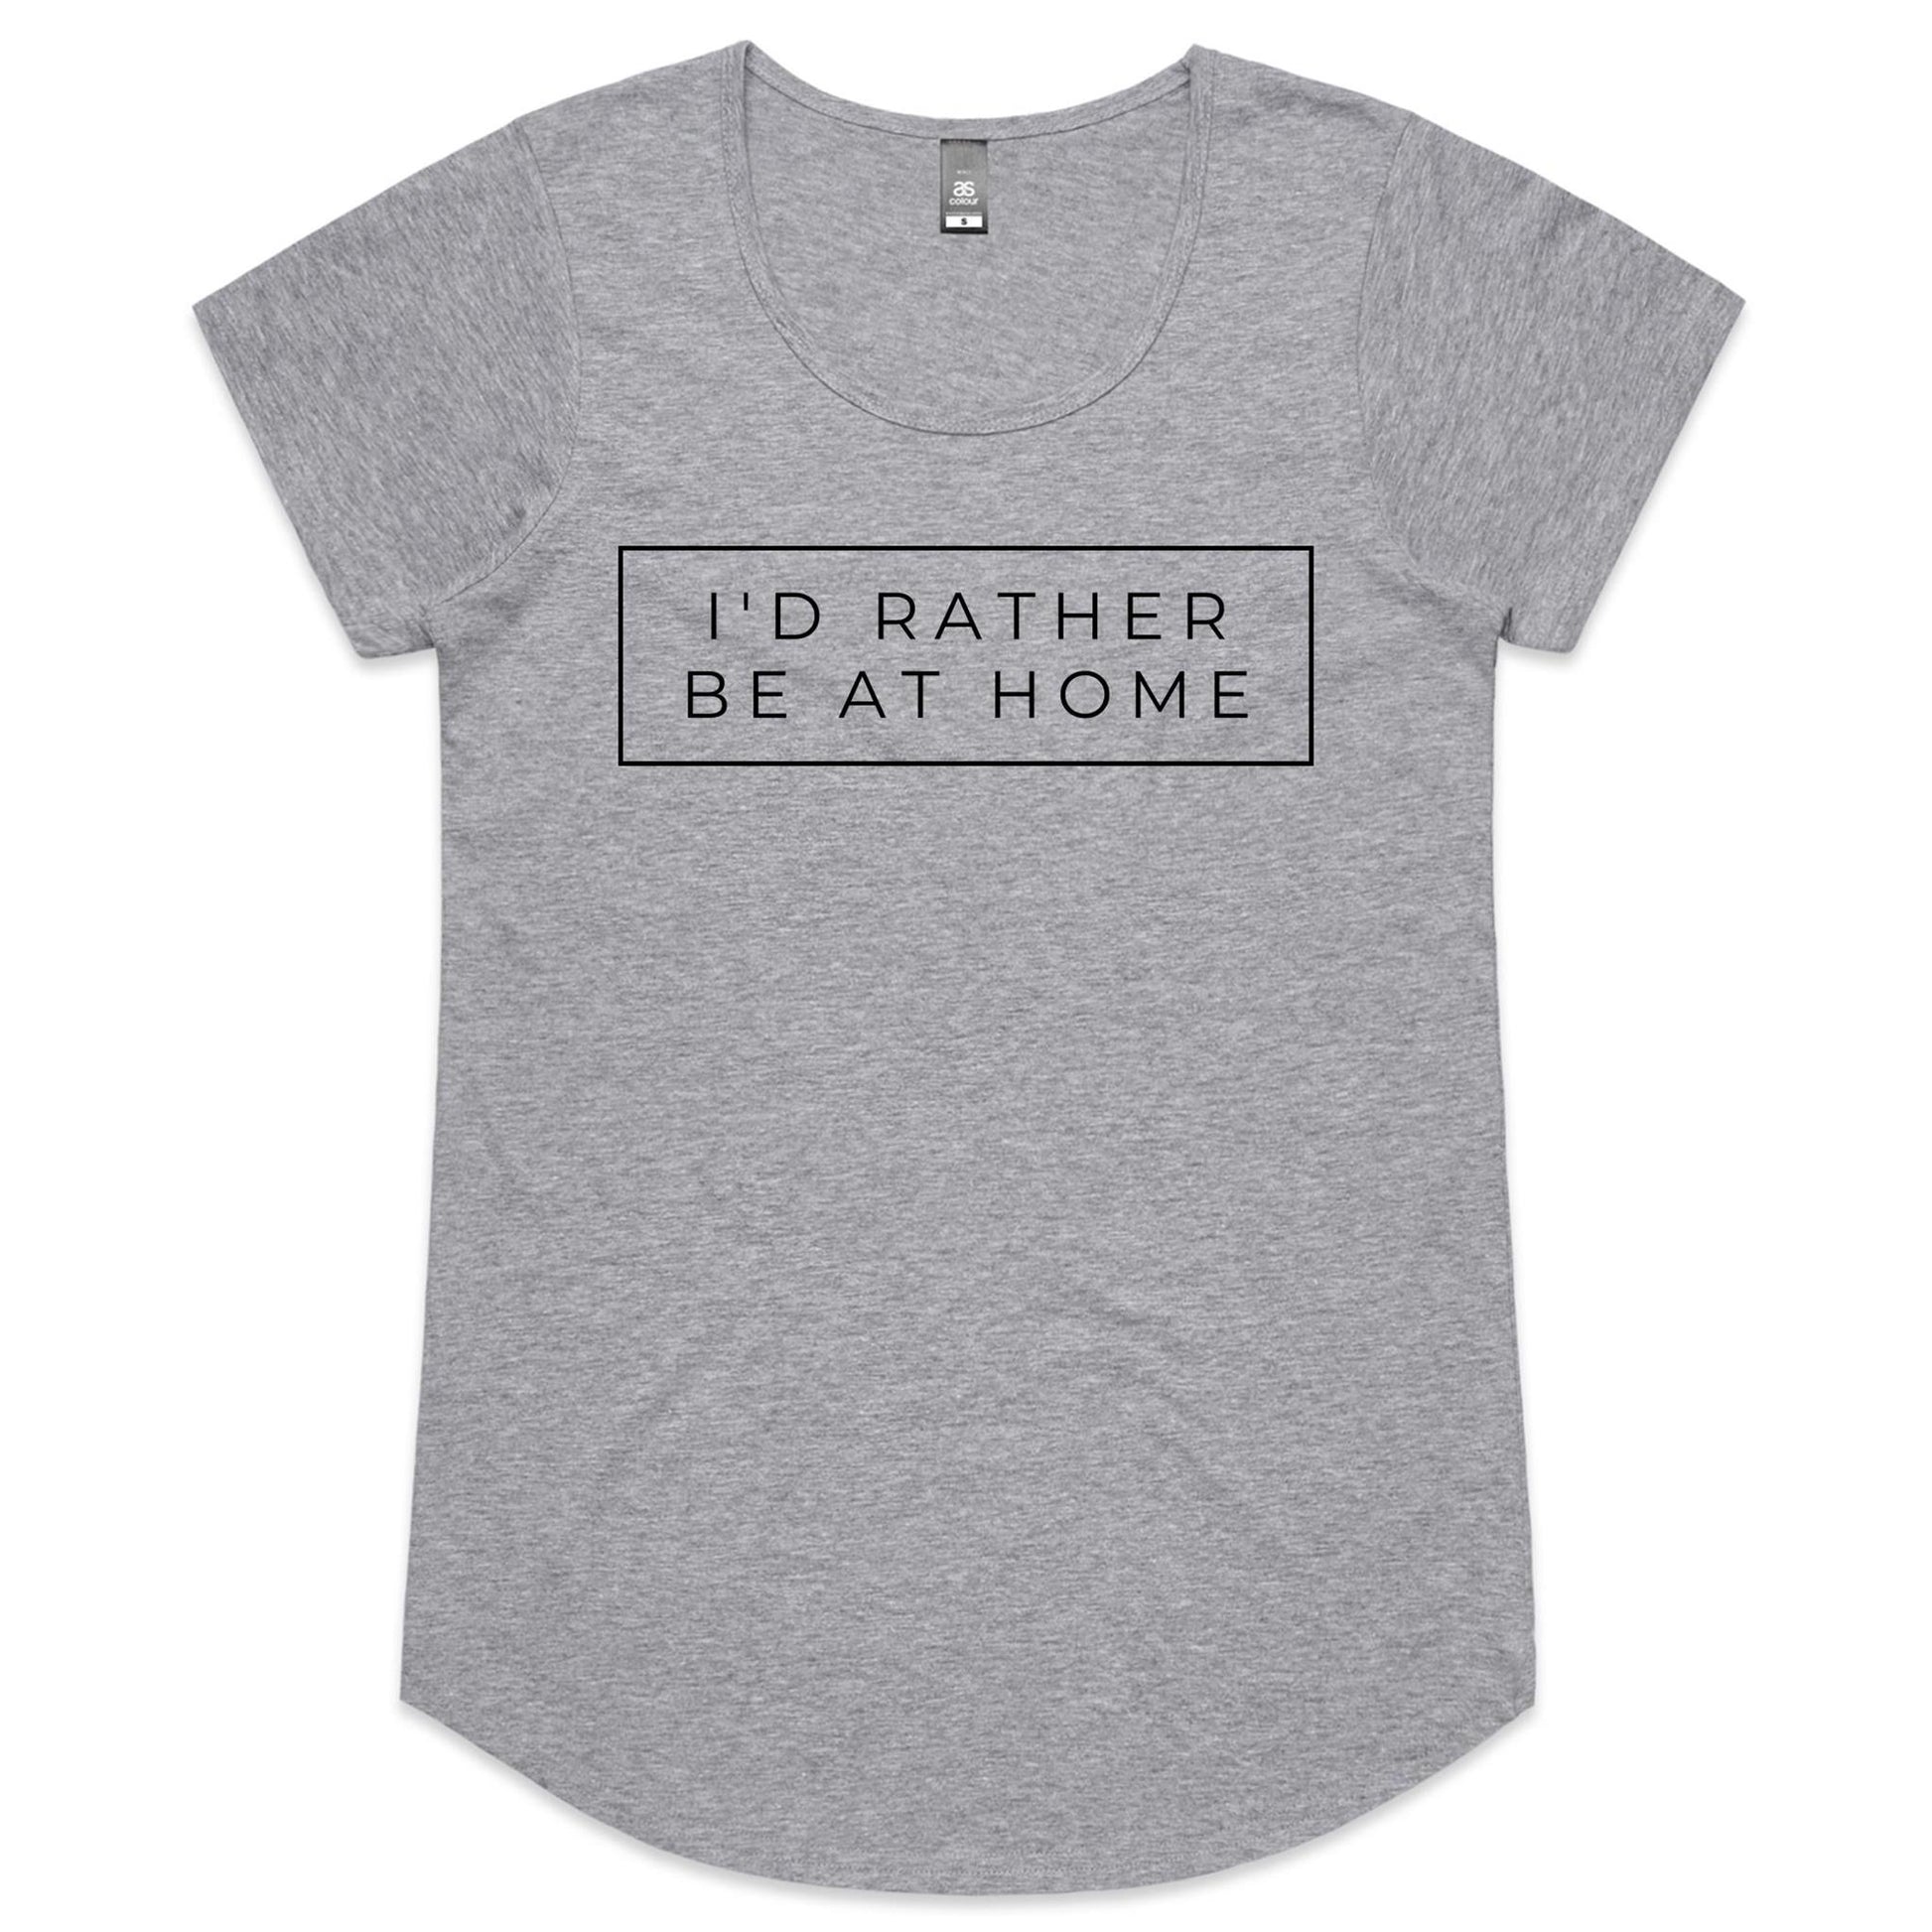 I'd Rather Be At Home - Womens Scoop Neck T-Shirt Grey Marle Womens Scoop Neck T-shirt home